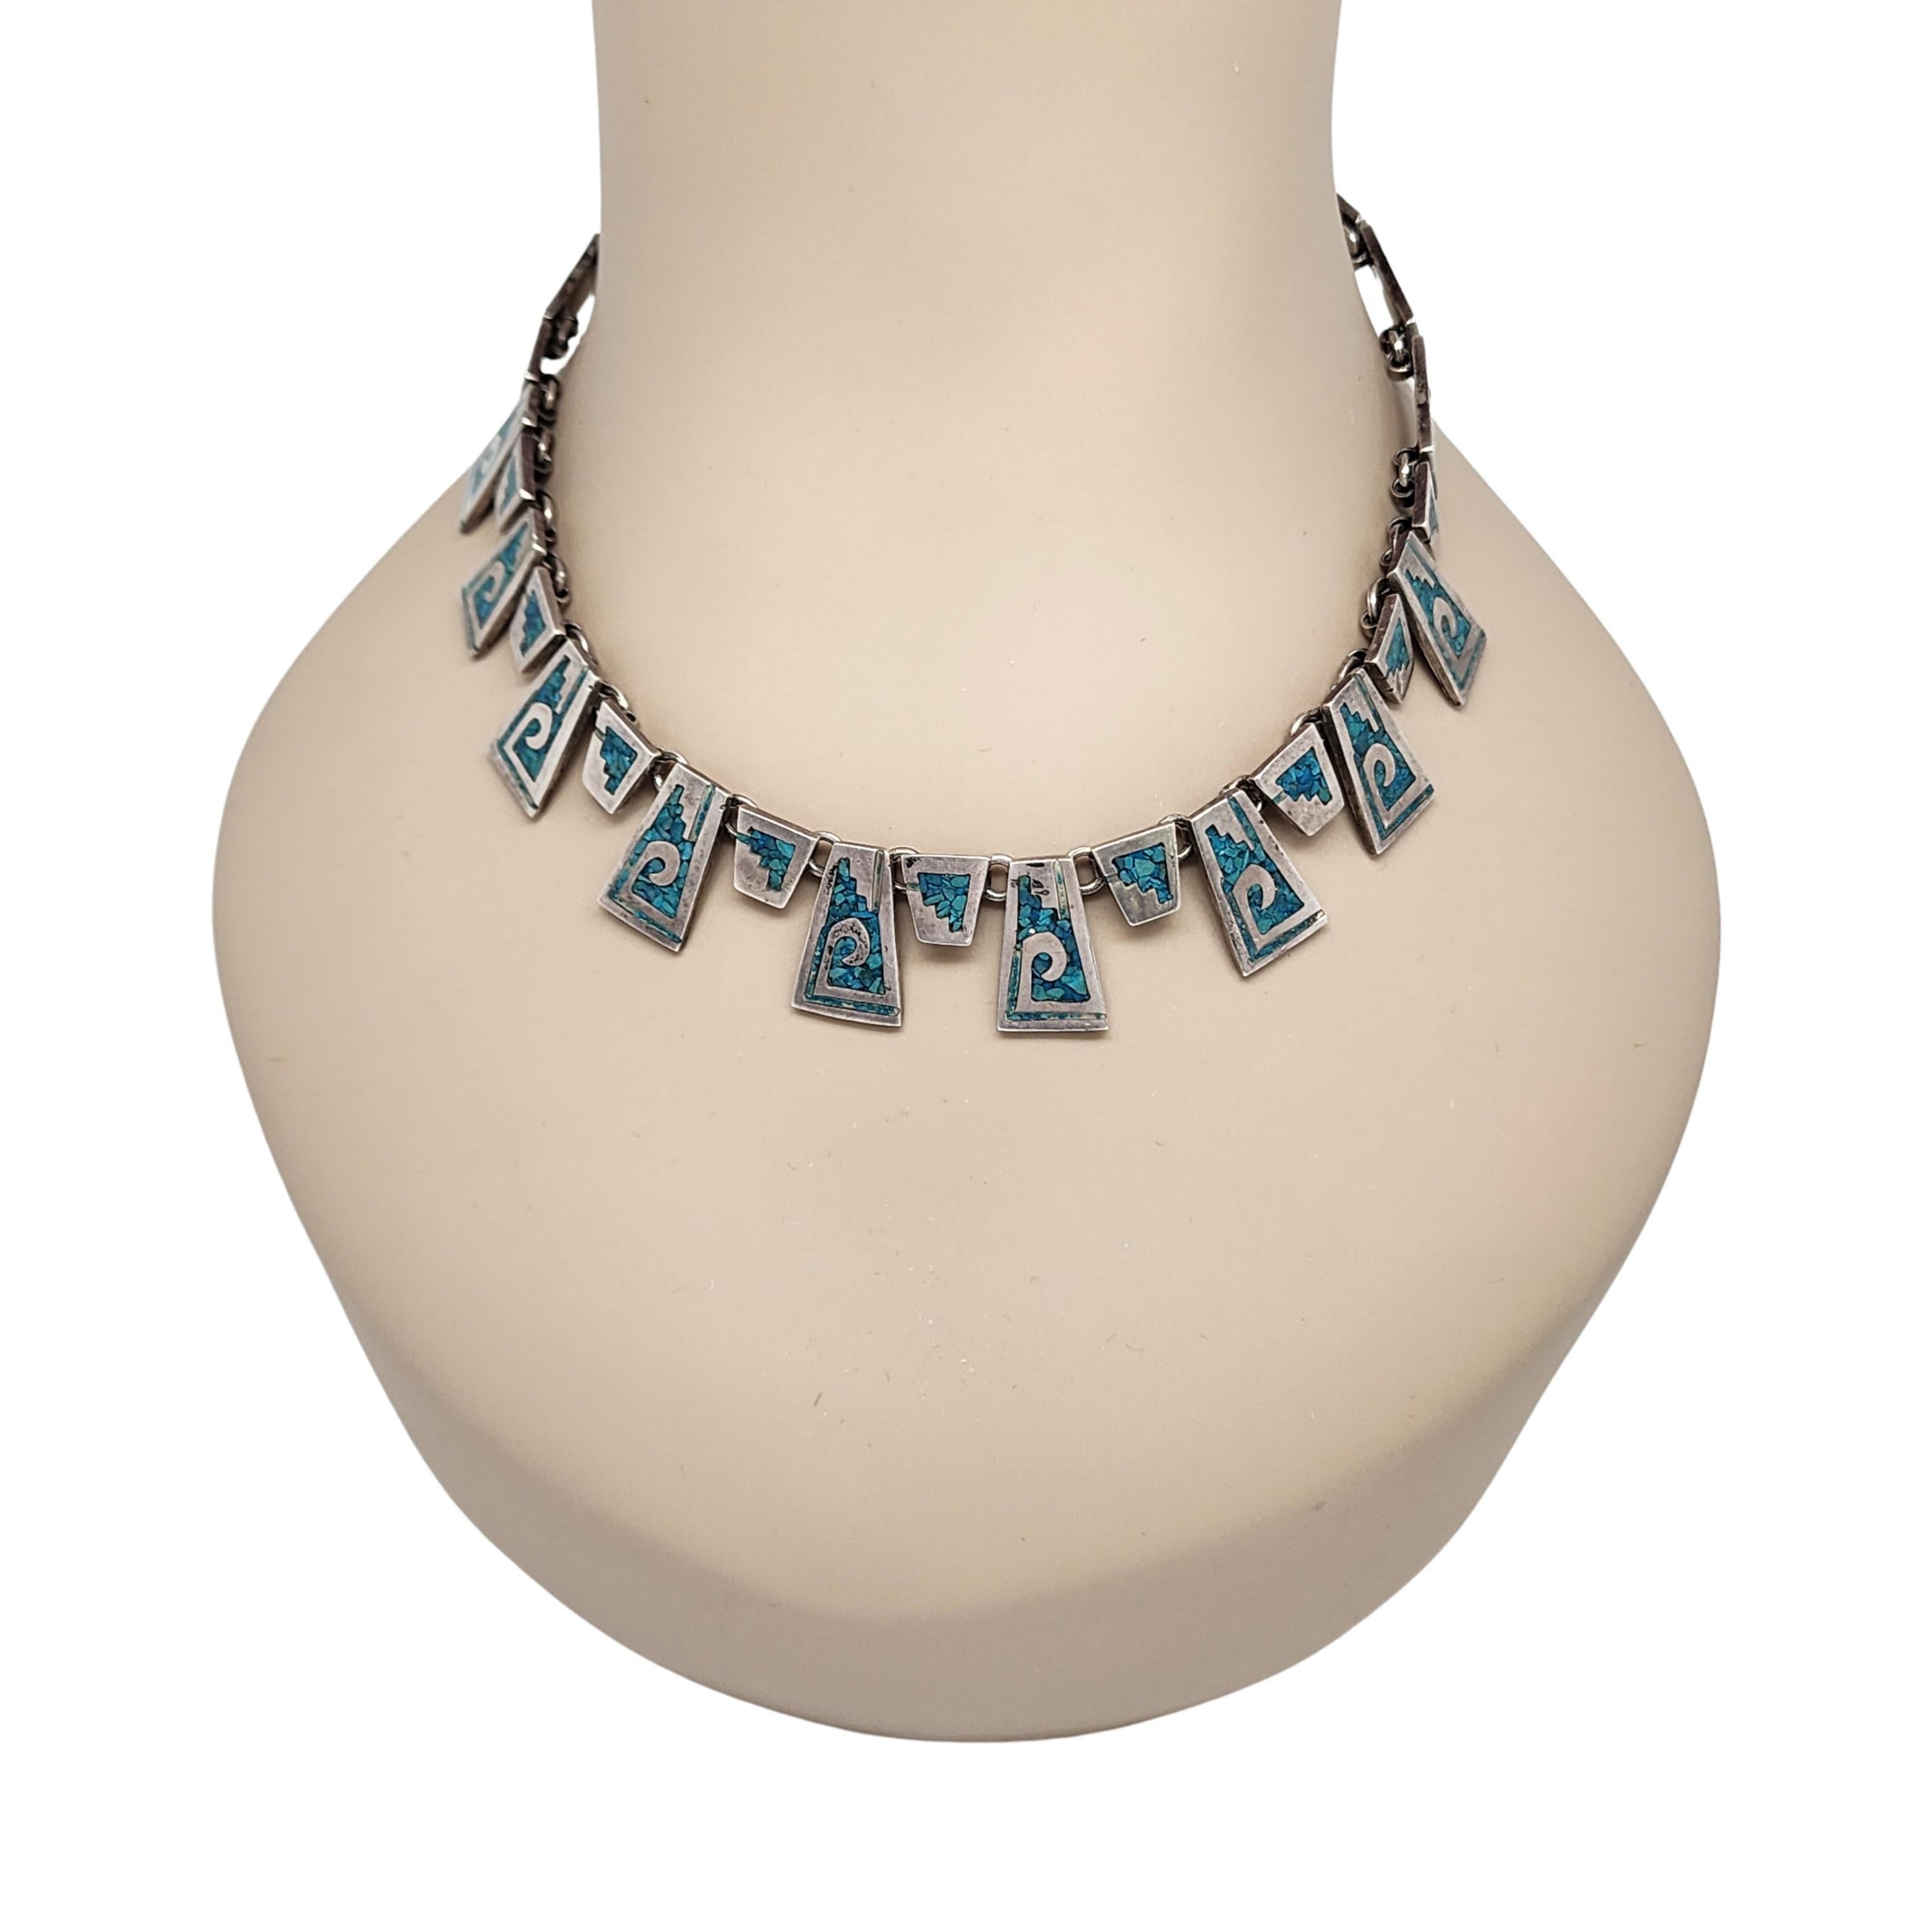 Mexico TB-70 Sterling Silver Crushed Turquoise Collar Necklace #15360 For Sale 2